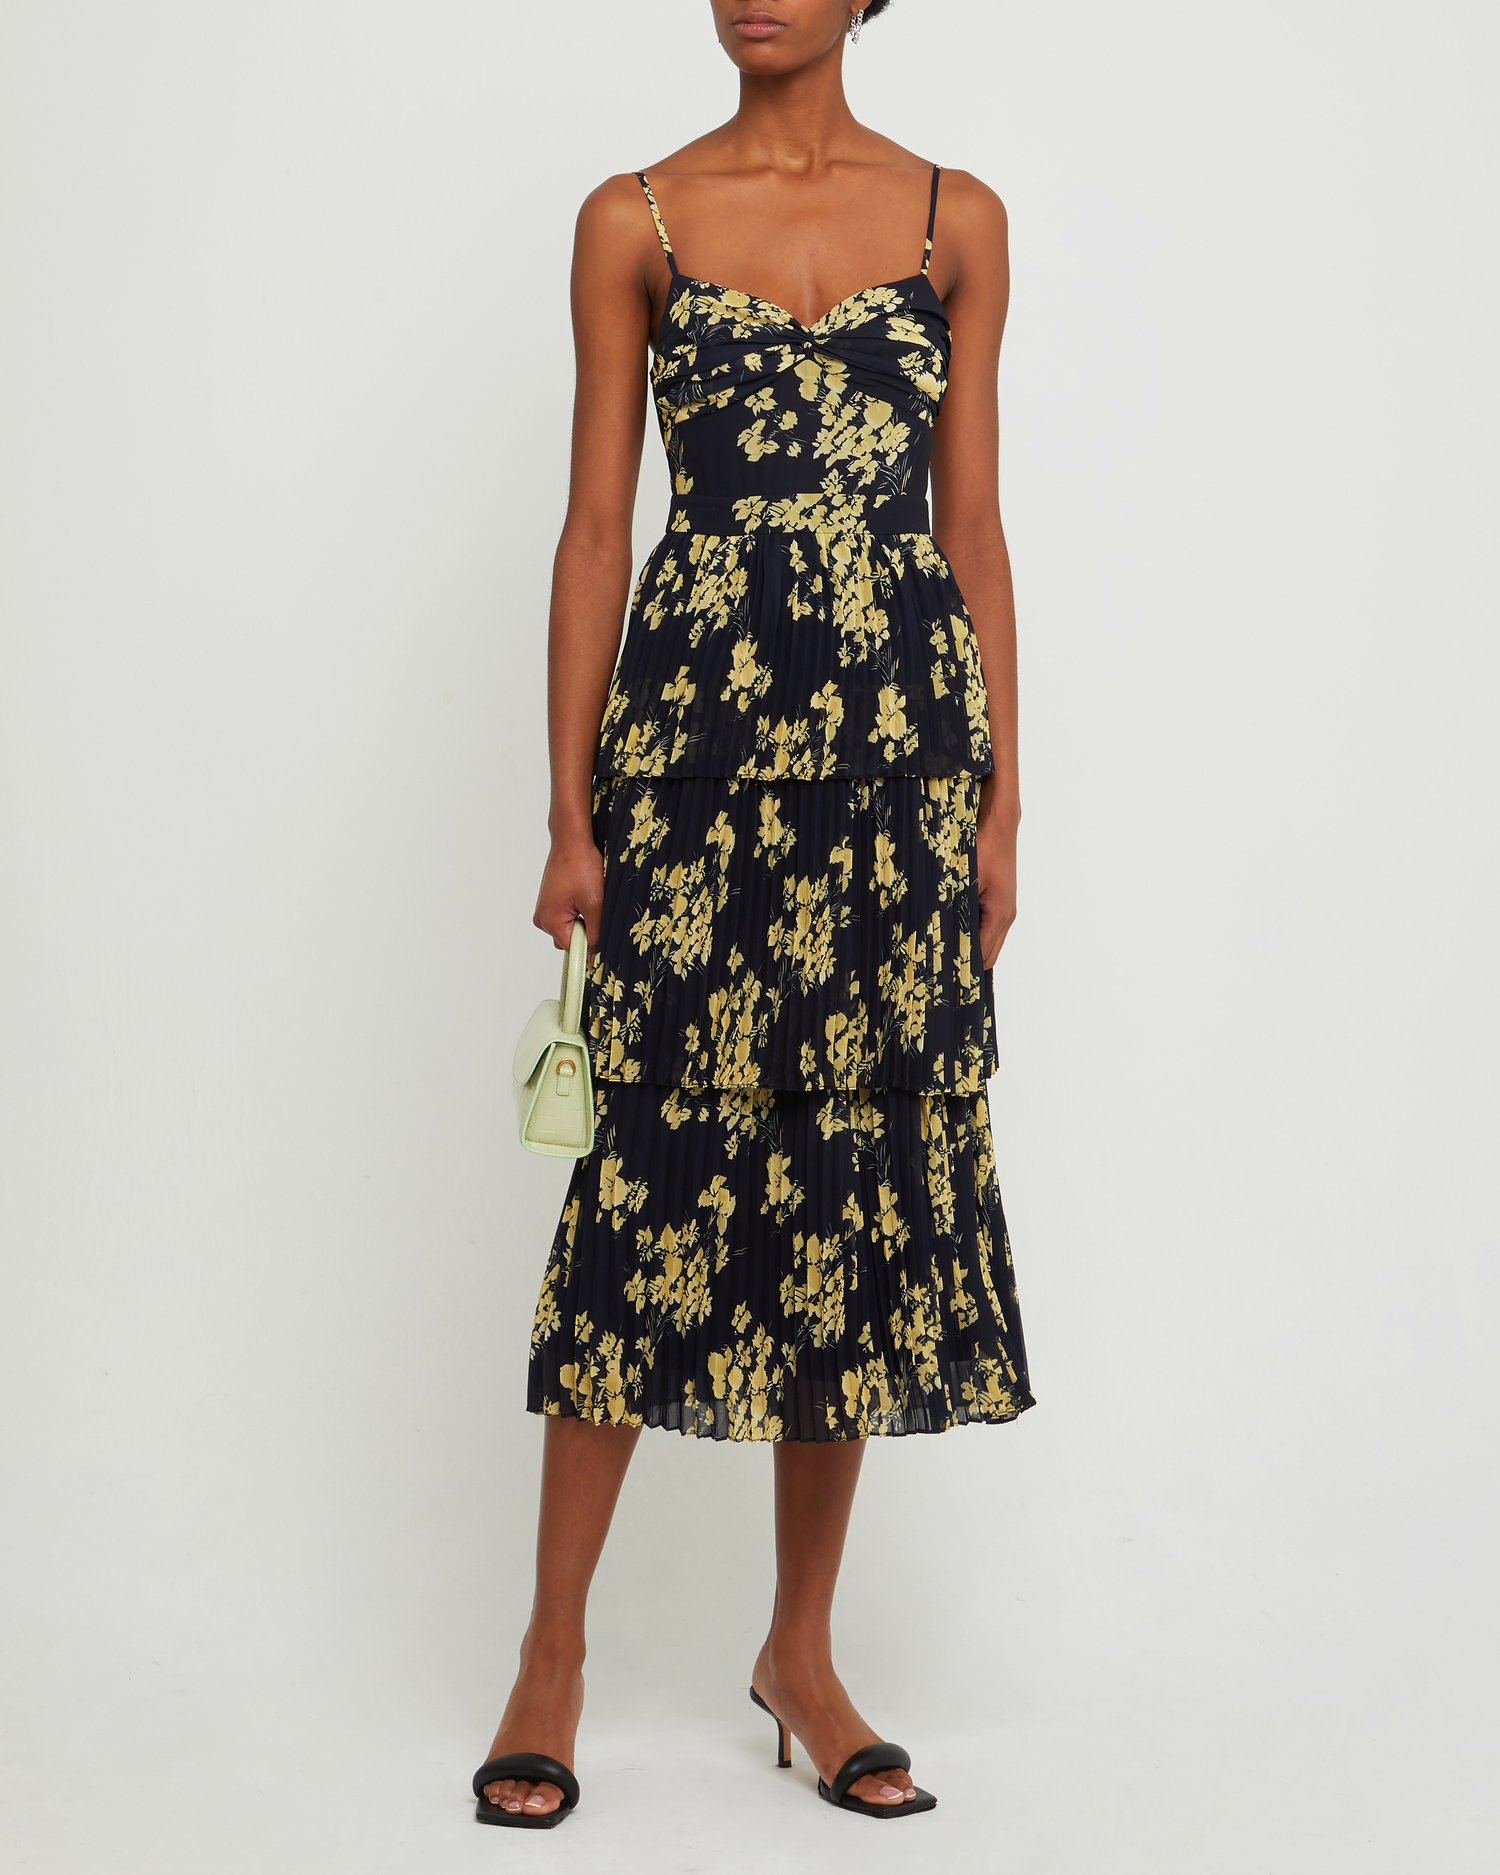 Fifth image of Paco Dress, a floral maxi dress, tiered, pleated, spaghetti strap, floral, fall